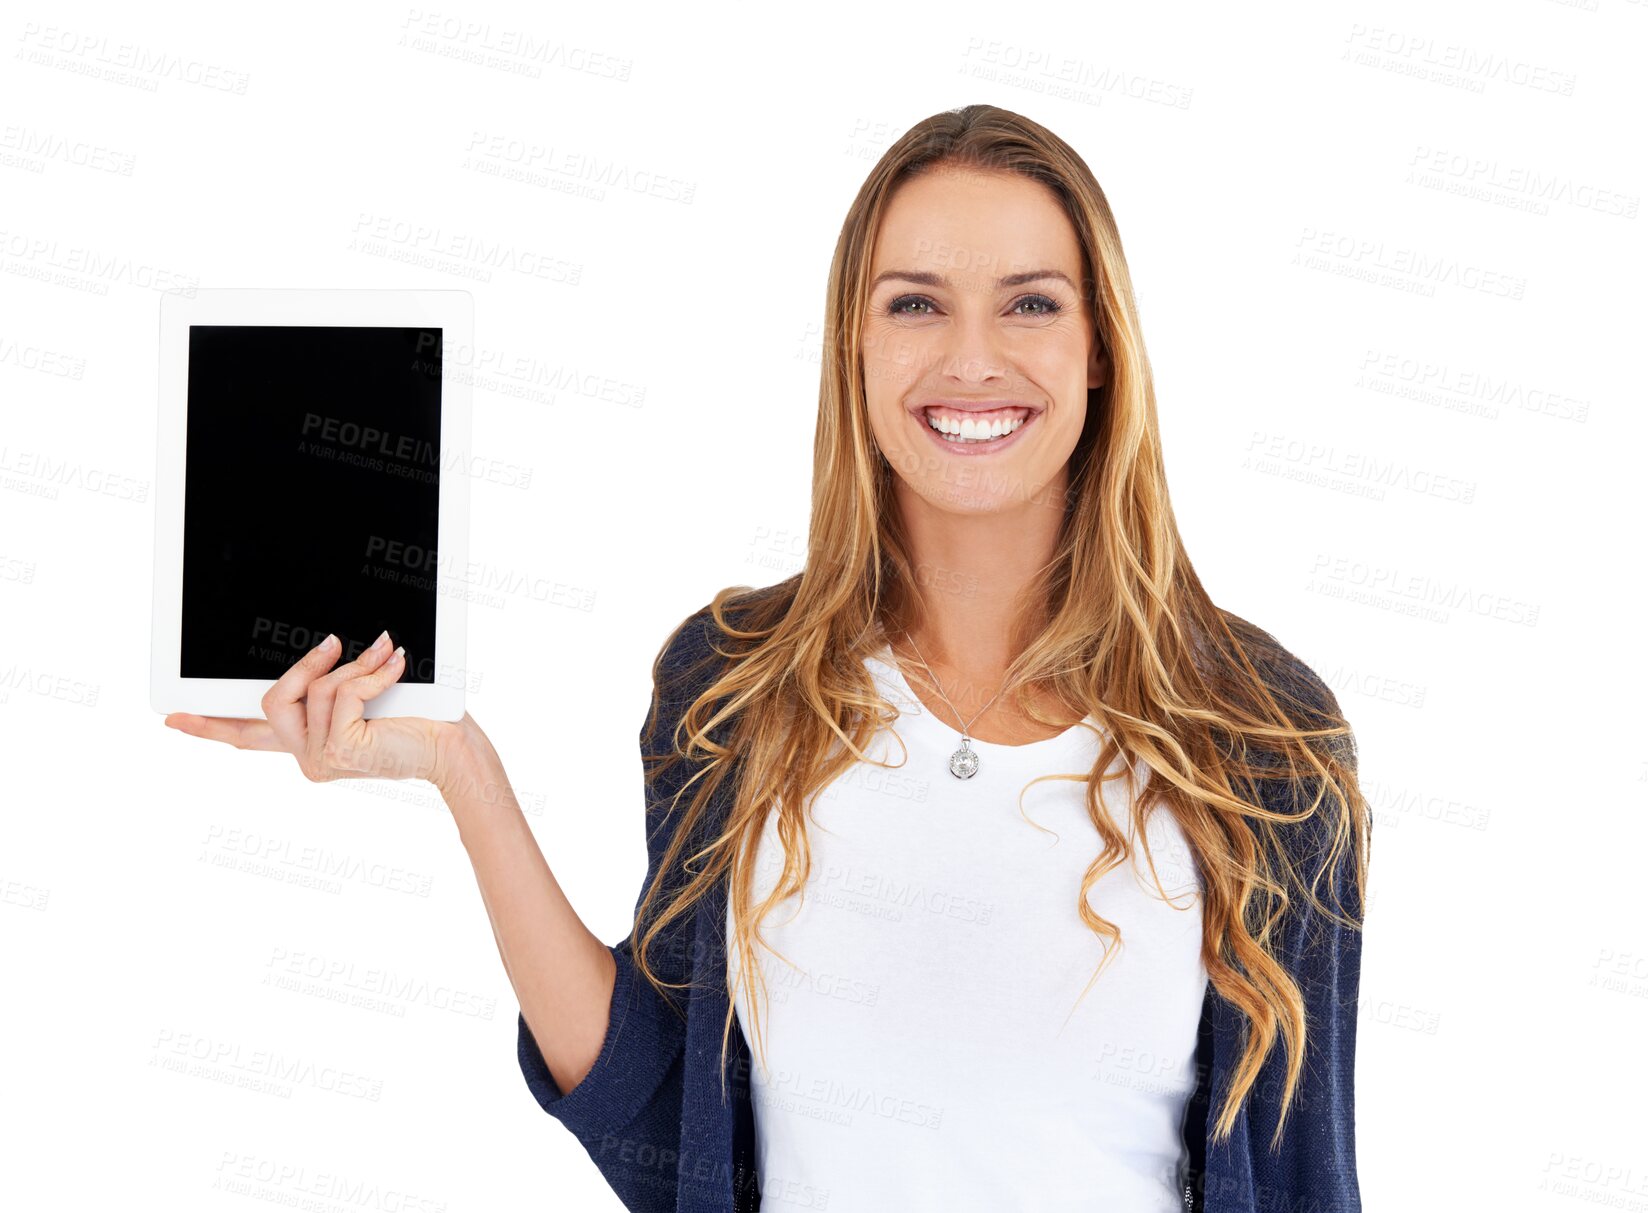 Buy stock photo Portrait of happy woman, tablet in hand and isolated on transparent png background for website promo. Happy model, screen and digital app for online technology, application and internet announcement.